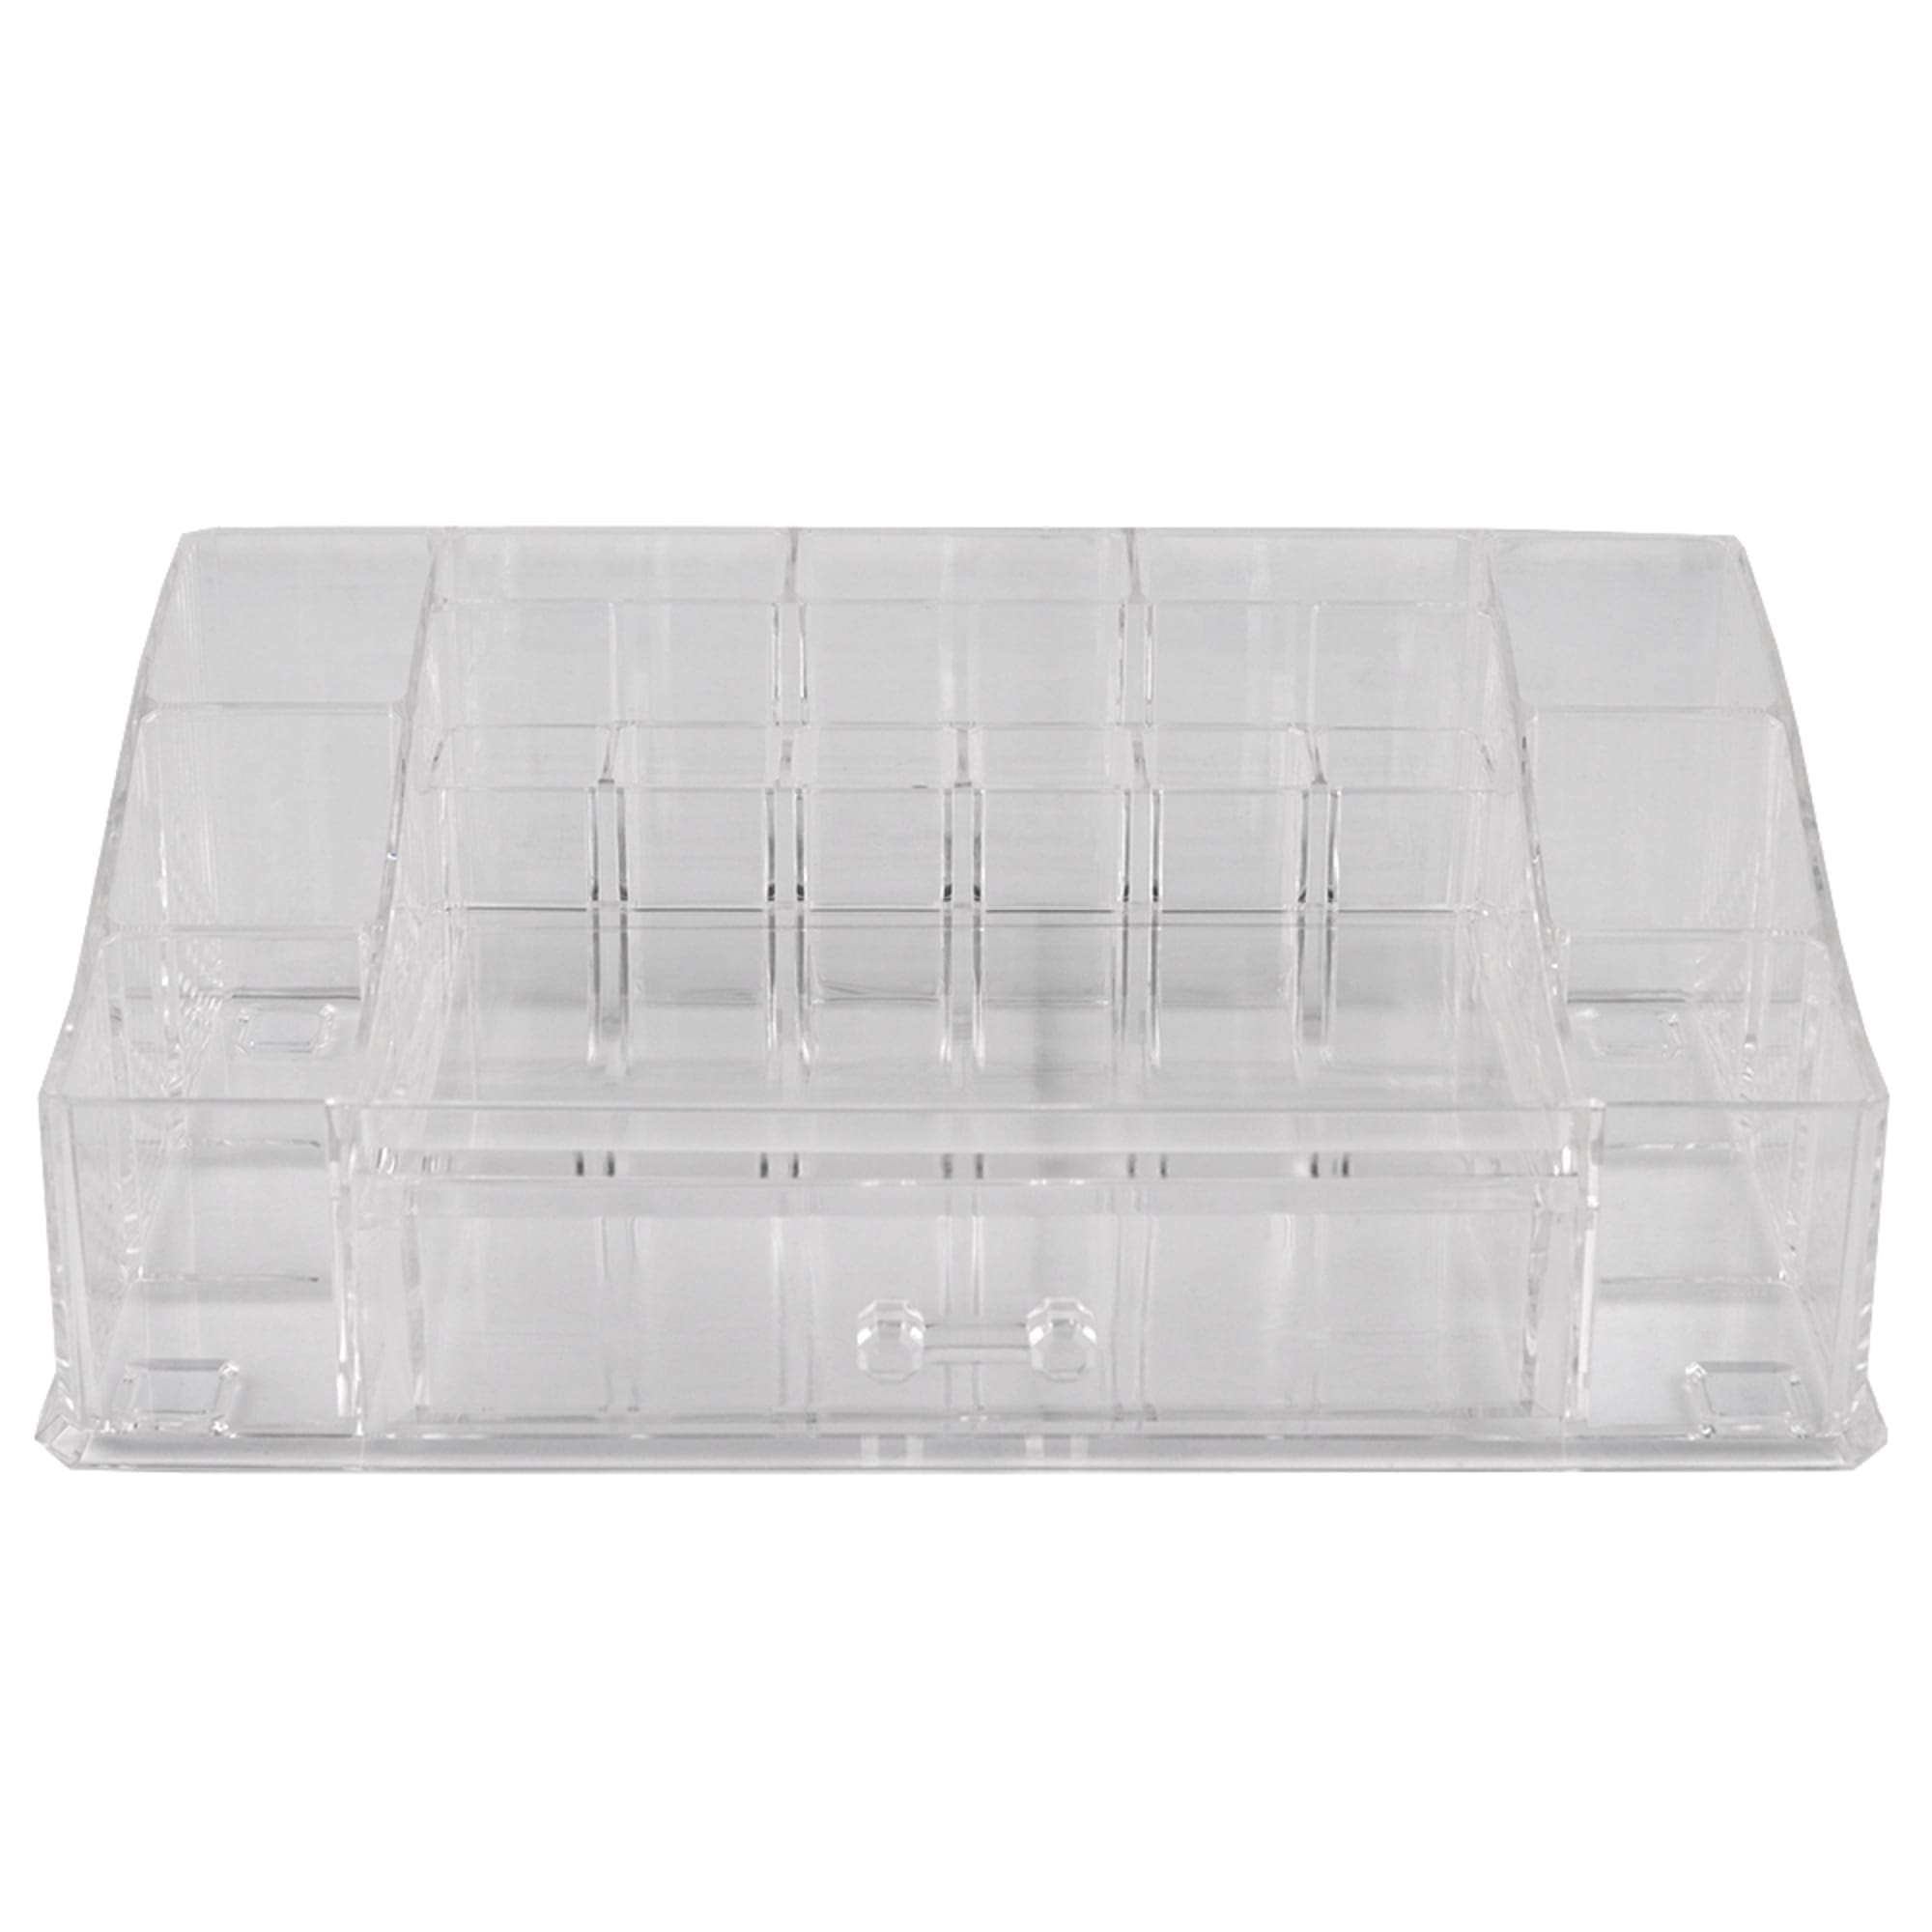 Home Basics Deluxe Large Shatter-Resistant Plastic Mult-Compartment Cosmetic Organizer with Easy Open Drawer, Clear $10.00 EACH, CASE PACK OF 12